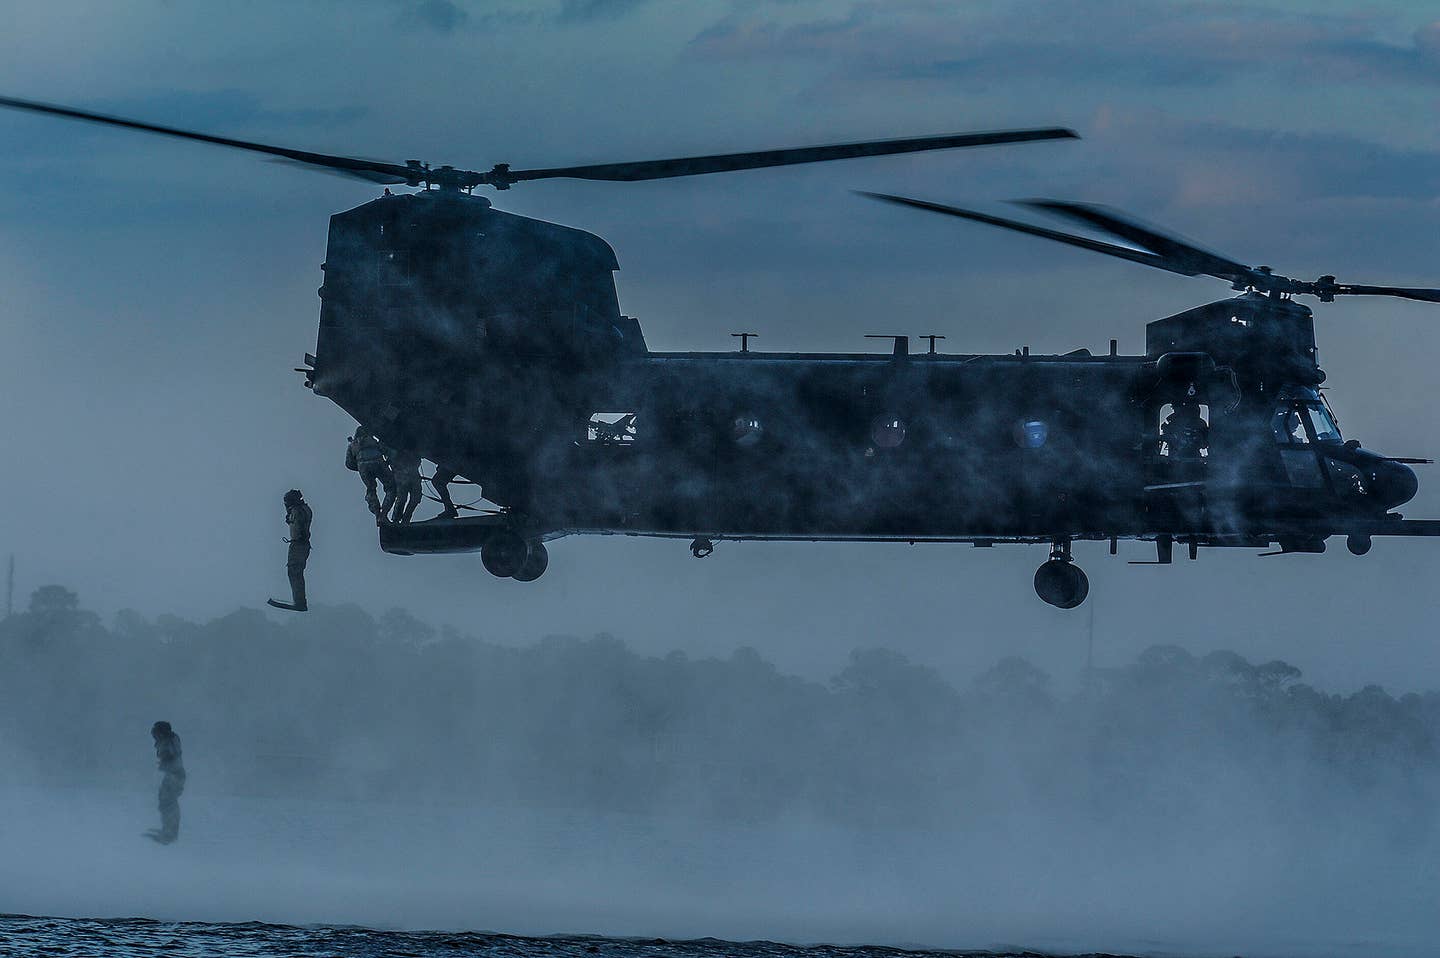 An MH-47 Chinook helicopter.